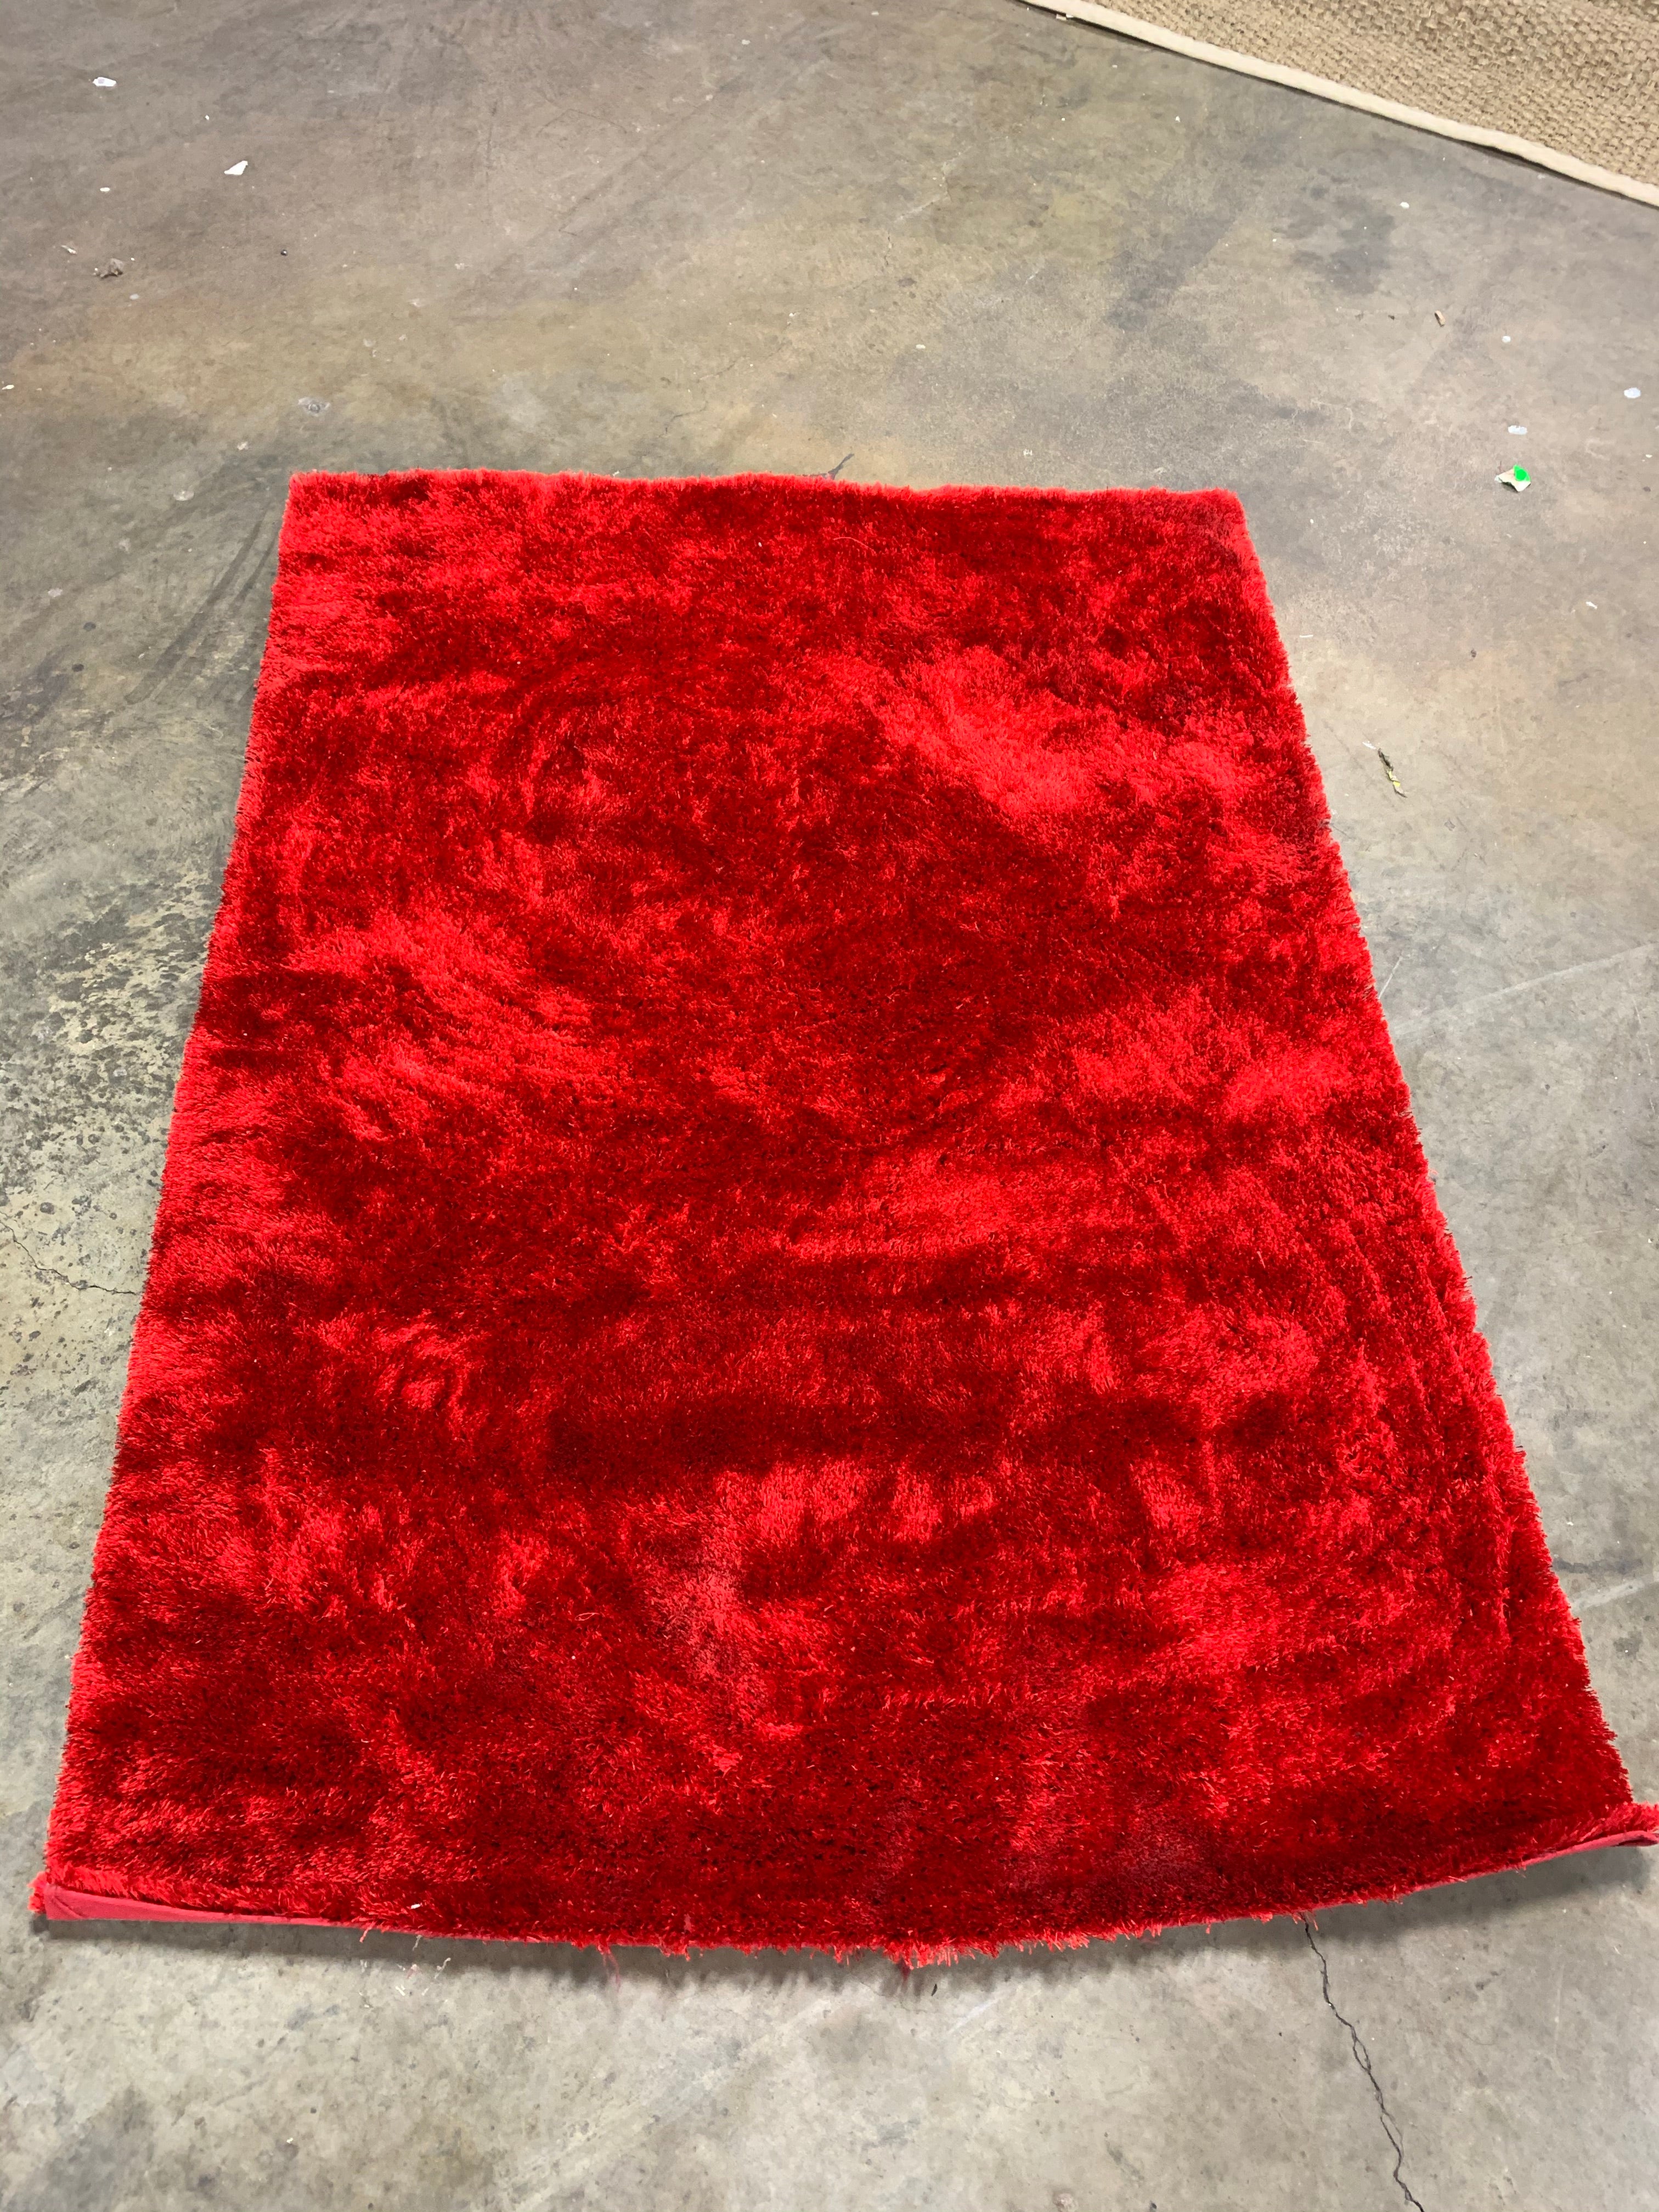 Amore Shag Rug, Red, 5’x7’ (#33R)